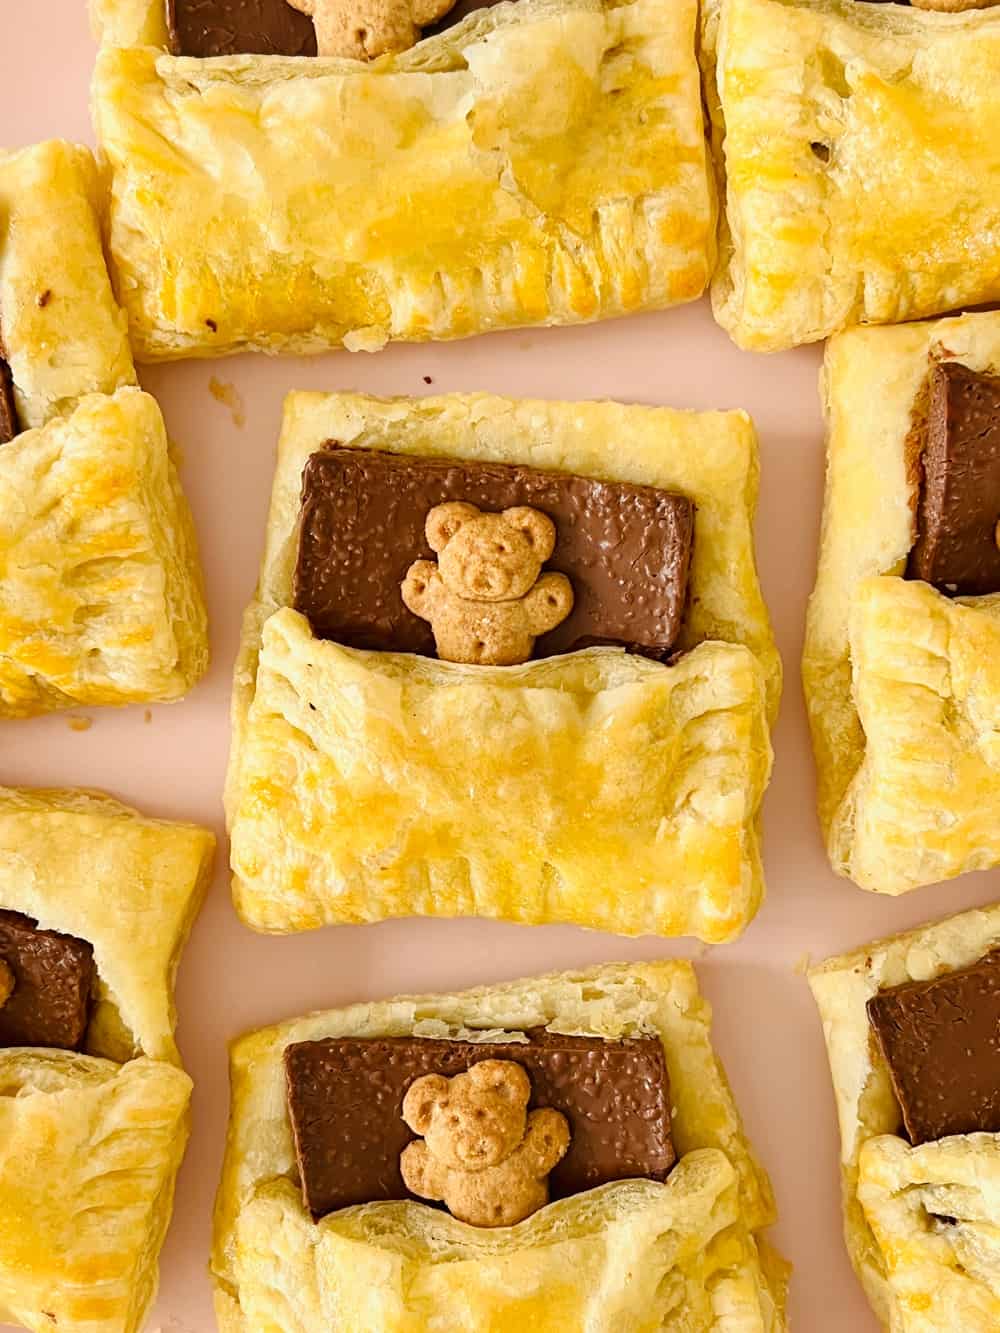 How to Make The Cutest Sleeping Bear Chocolate Pastry